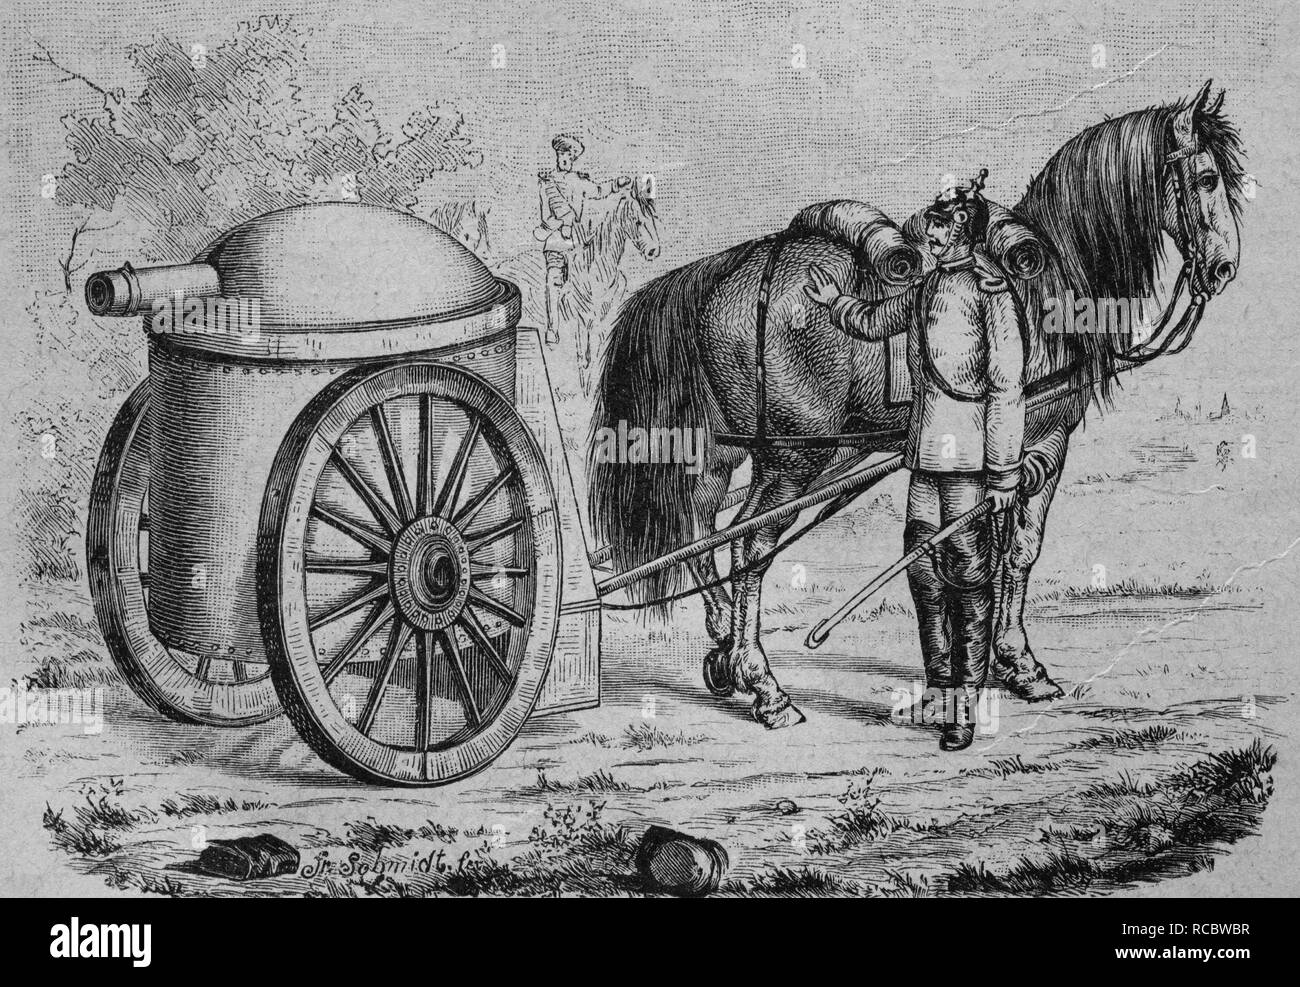 Wheeled armored turret of Hermann August Jacques Gruson, 1821 - 1895, inventor, scientist and industrialist, historic engraving Stock Photo